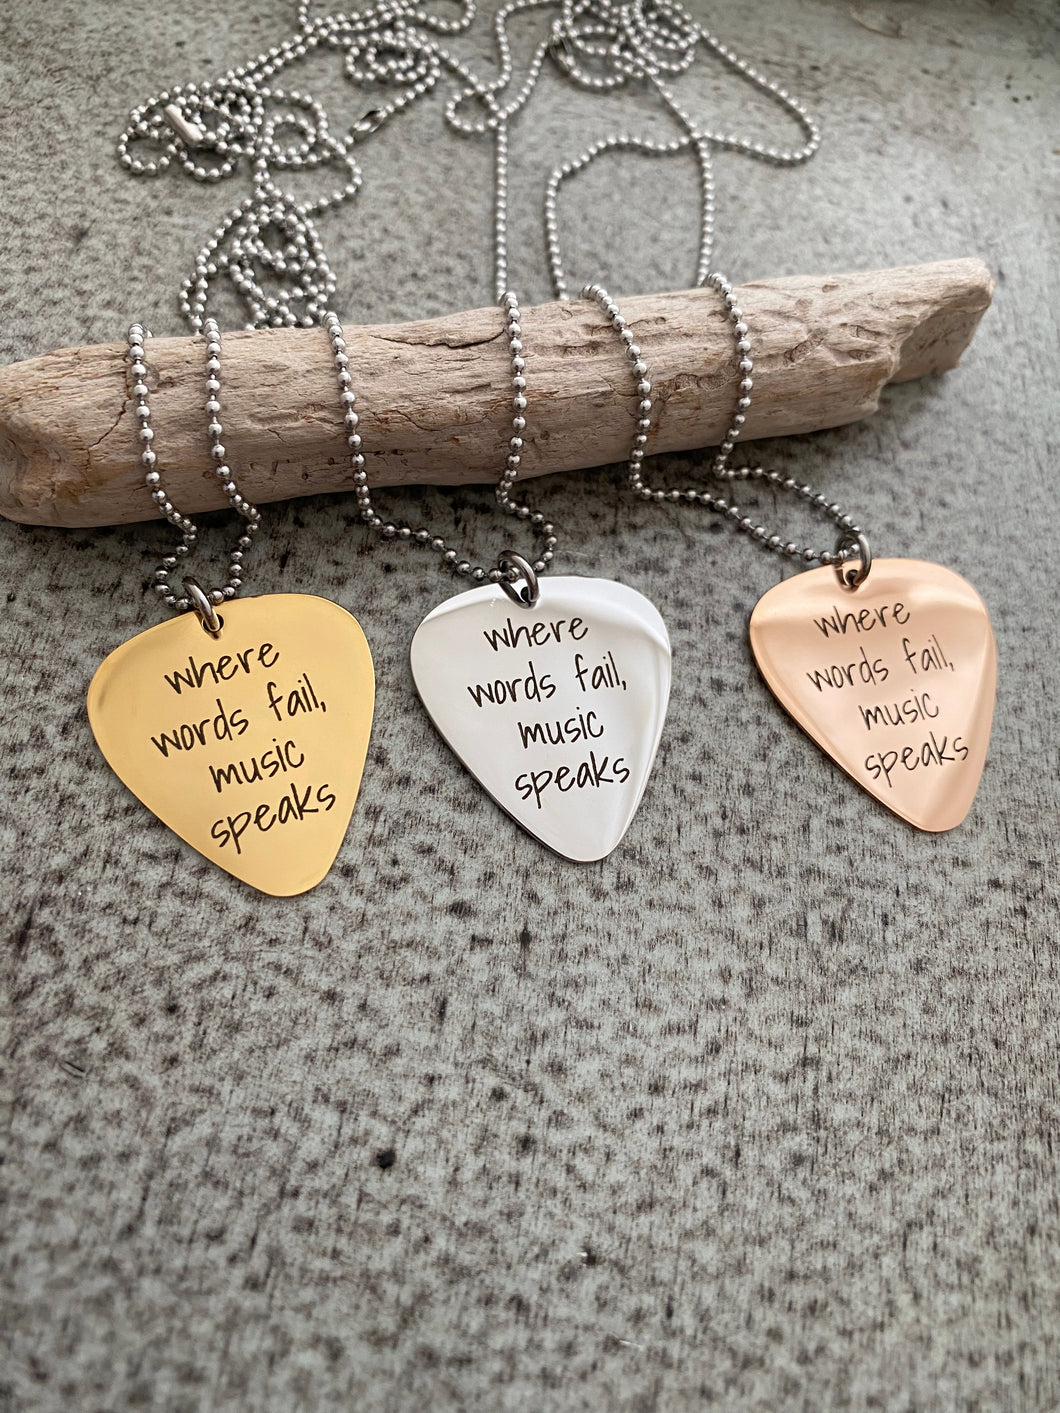 where words fail, music speaks - engraved stainless steel guitar pick necklace - stainless steel ball chain - gift for music lover